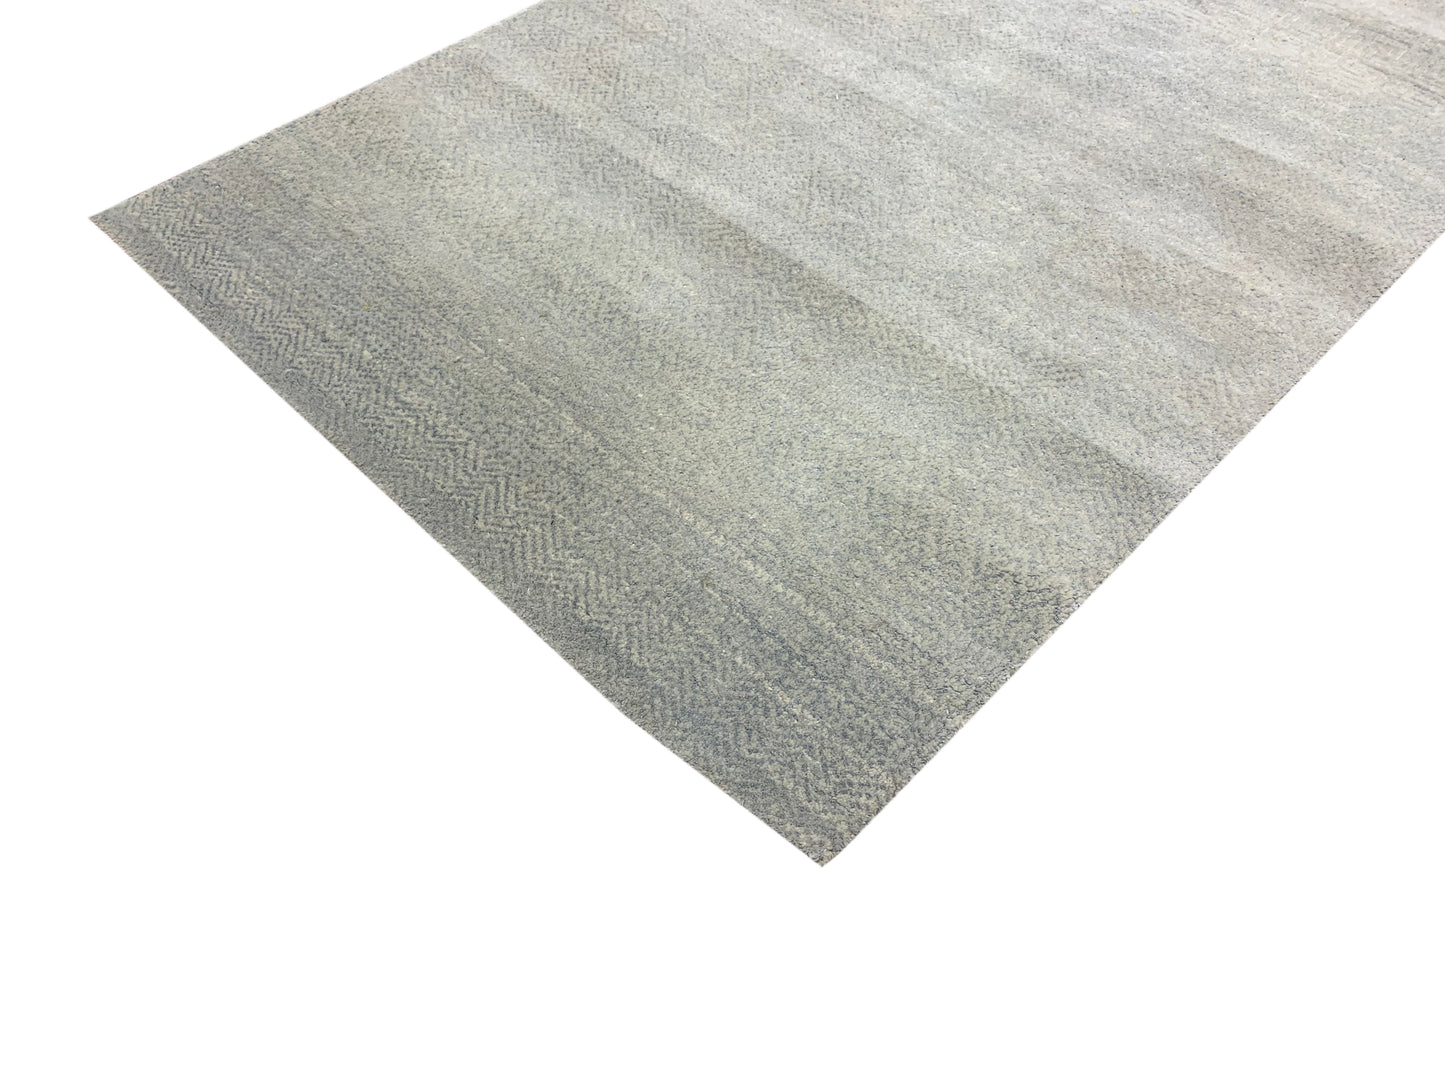 Get trendy with Grey Viscose Wool Modern Handknotted Area Rug 2.11x5.3ft 89x161Cms - Modern Rugs available at Jaipur Oriental Rugs. Grab yours for $645.00 today!